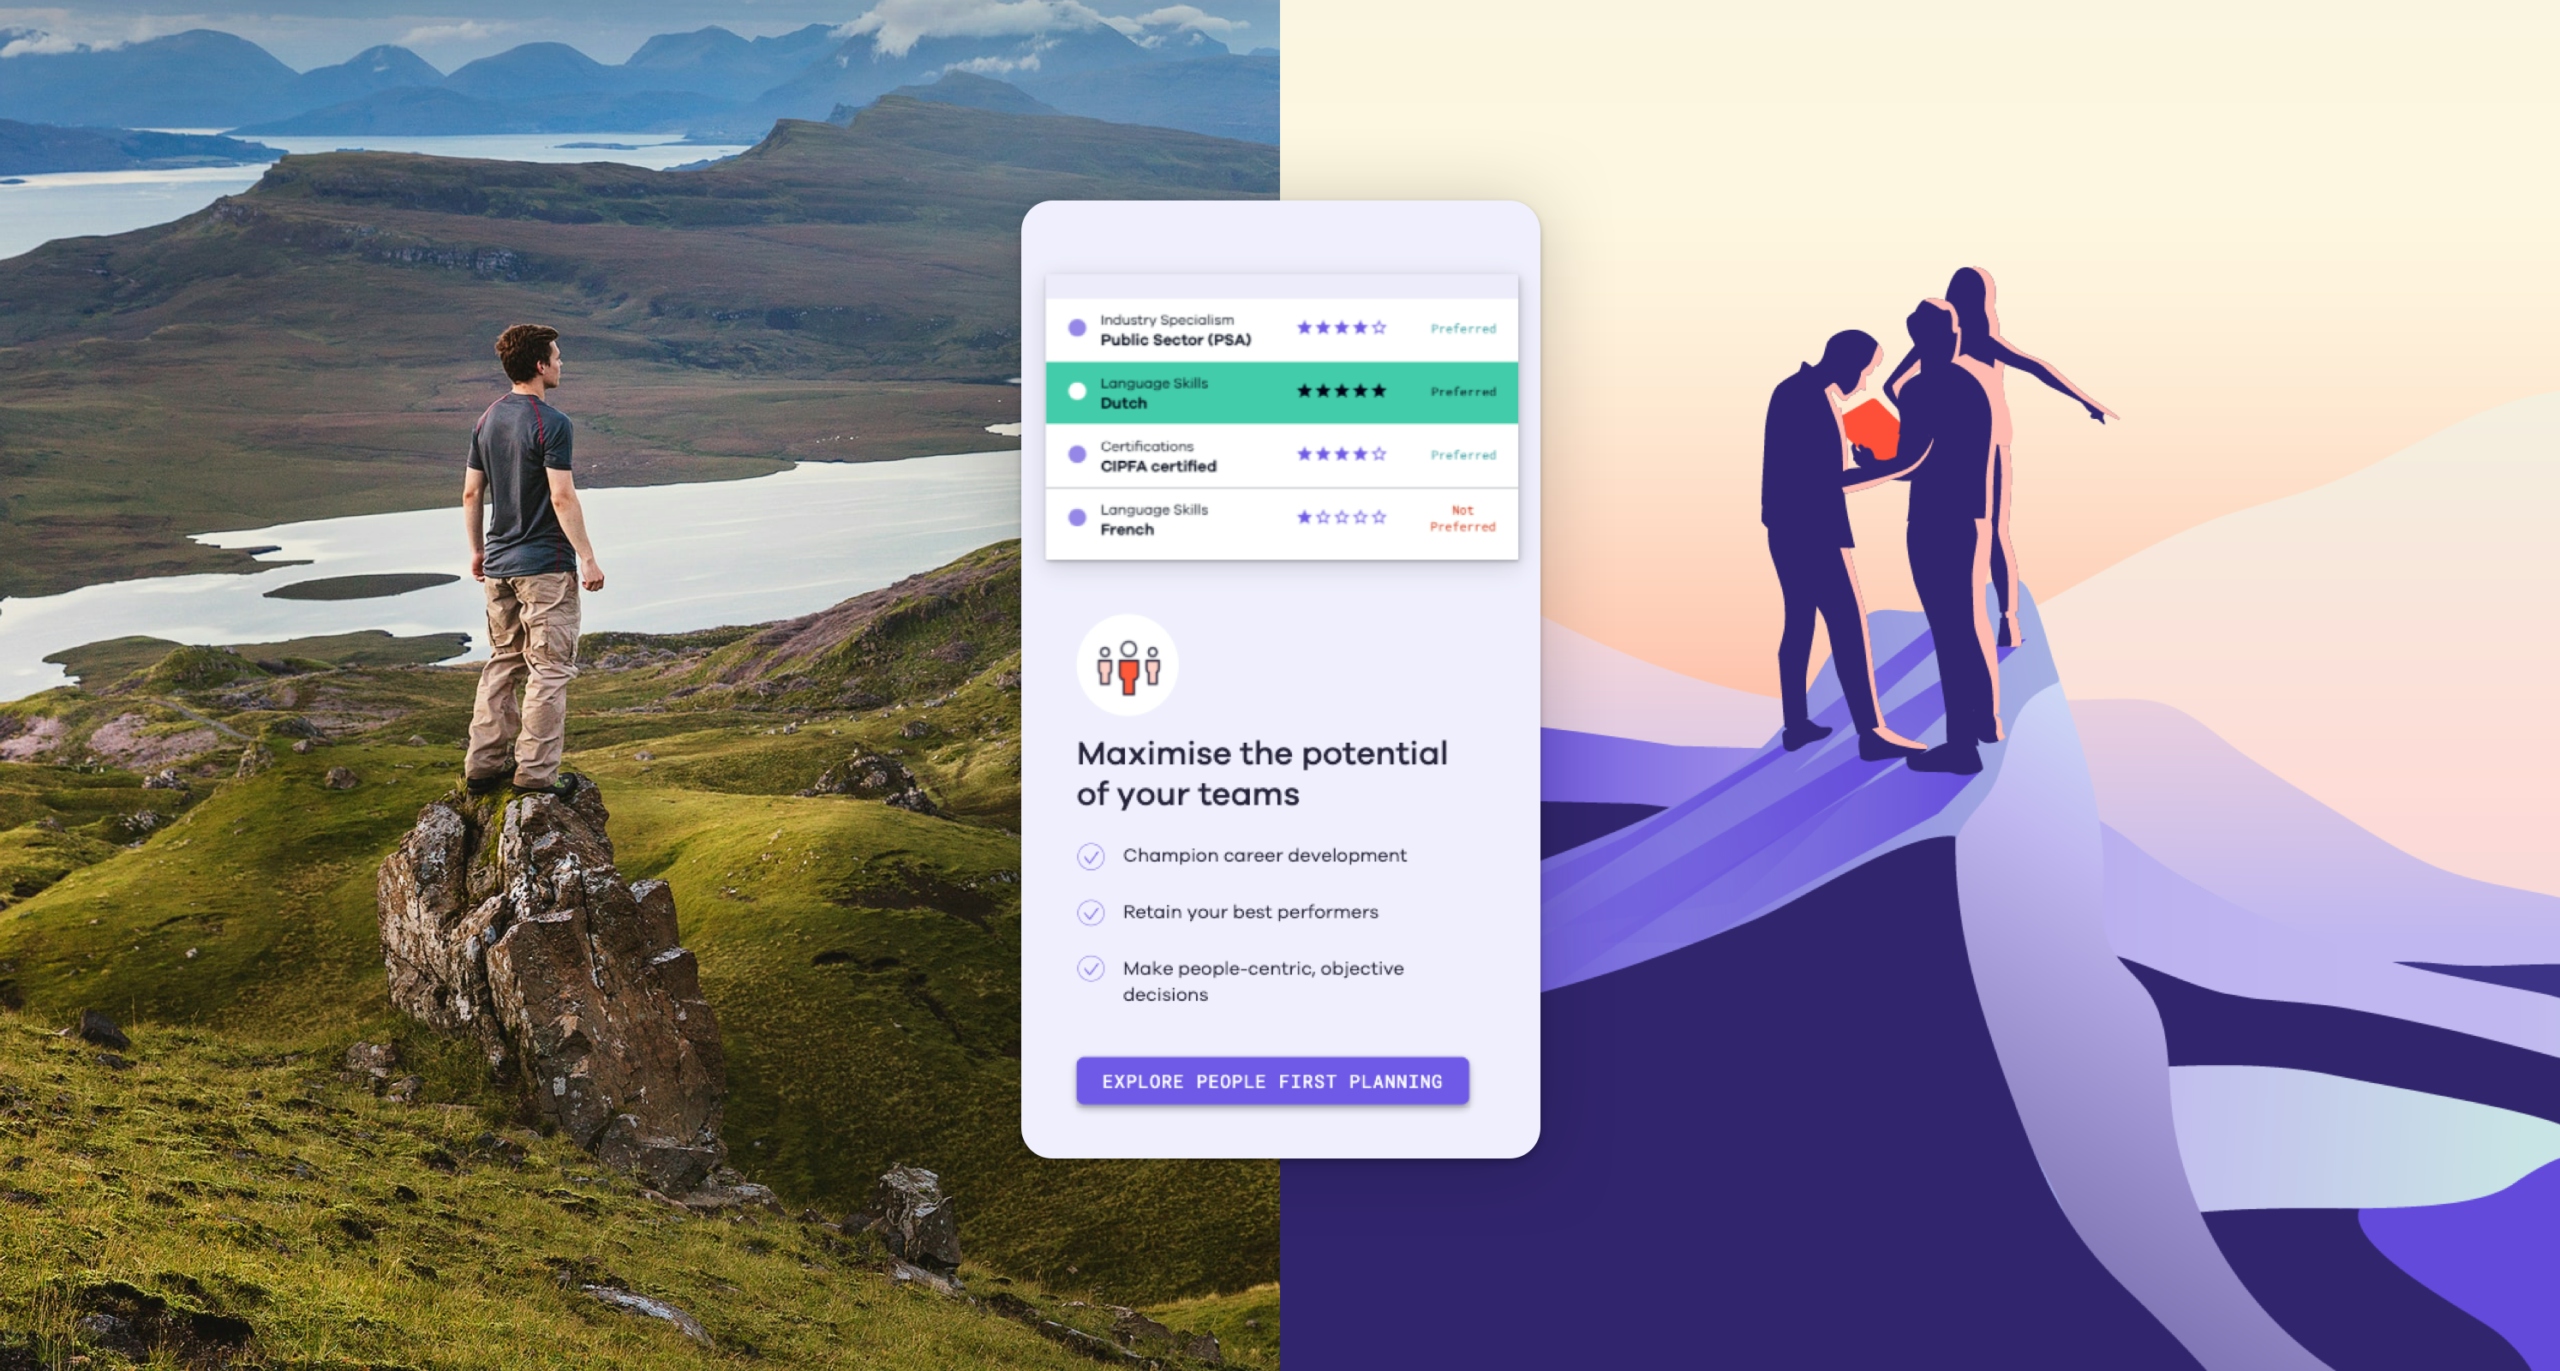 A man stands on landscape on the left hand of the image. One the right side, there are three stylised figures on a mountain. Someone points to the distance, they are reading something in Dayshape orange. A mobile screenshot outlines desired skills for a role and invites the user to “Maximise your team's potential” and lists some benefits of Dayshape and the purple call-to-action states “Explore people first planning”